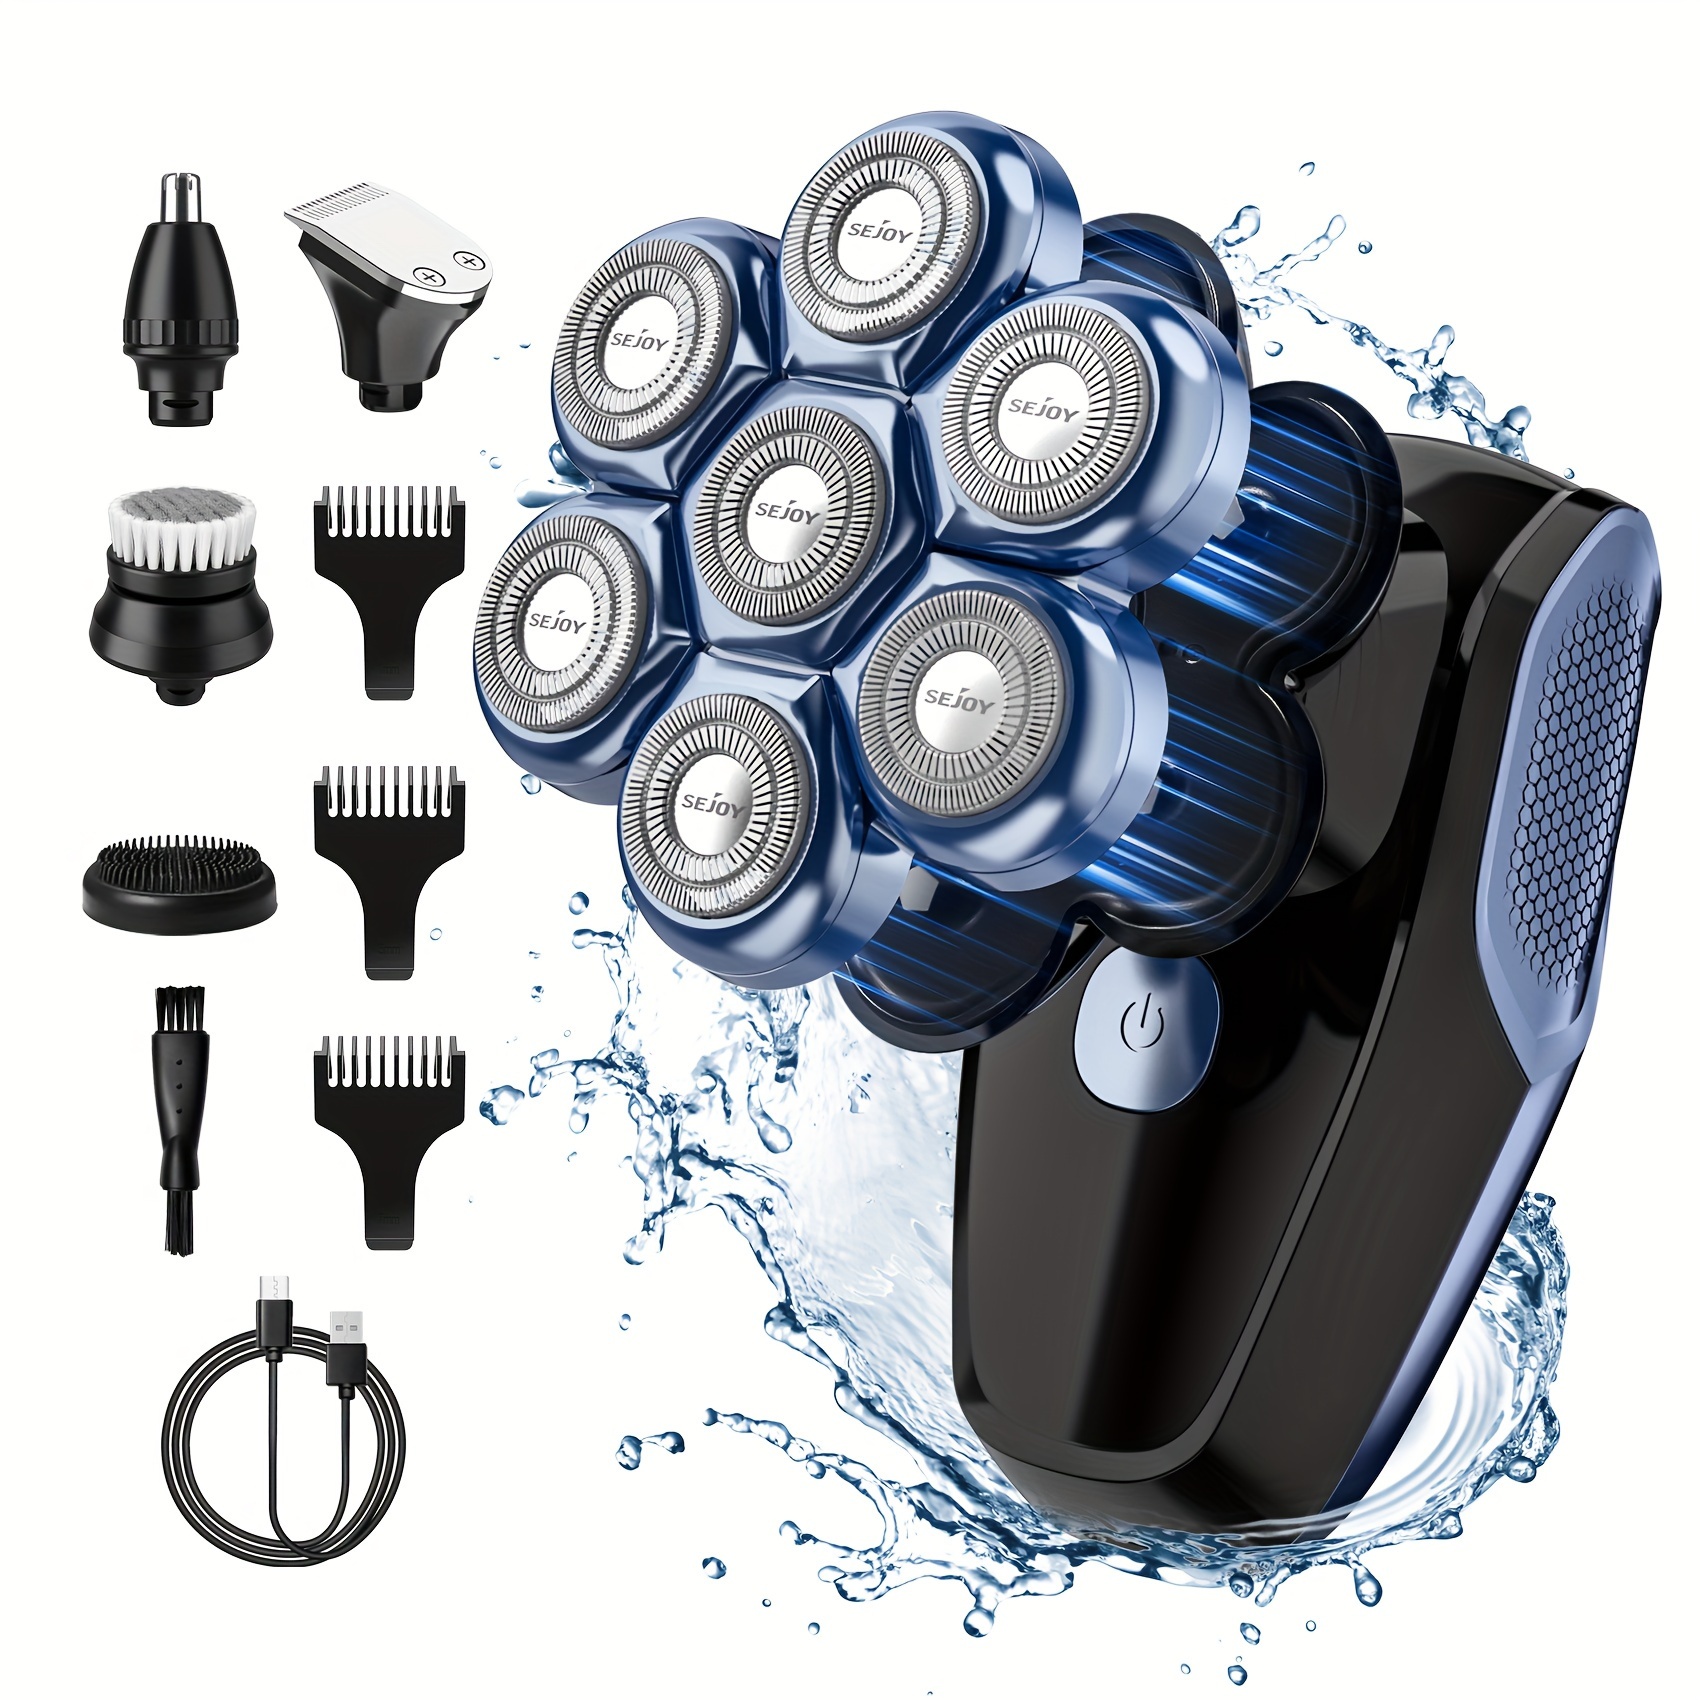 

Sejoy Electric Head Shaver For Bald Men, 5-in-1 Rechargeable Rotary Electric Razor, 7d Floating Heads, Led Display, 3-speed Grooming Kit